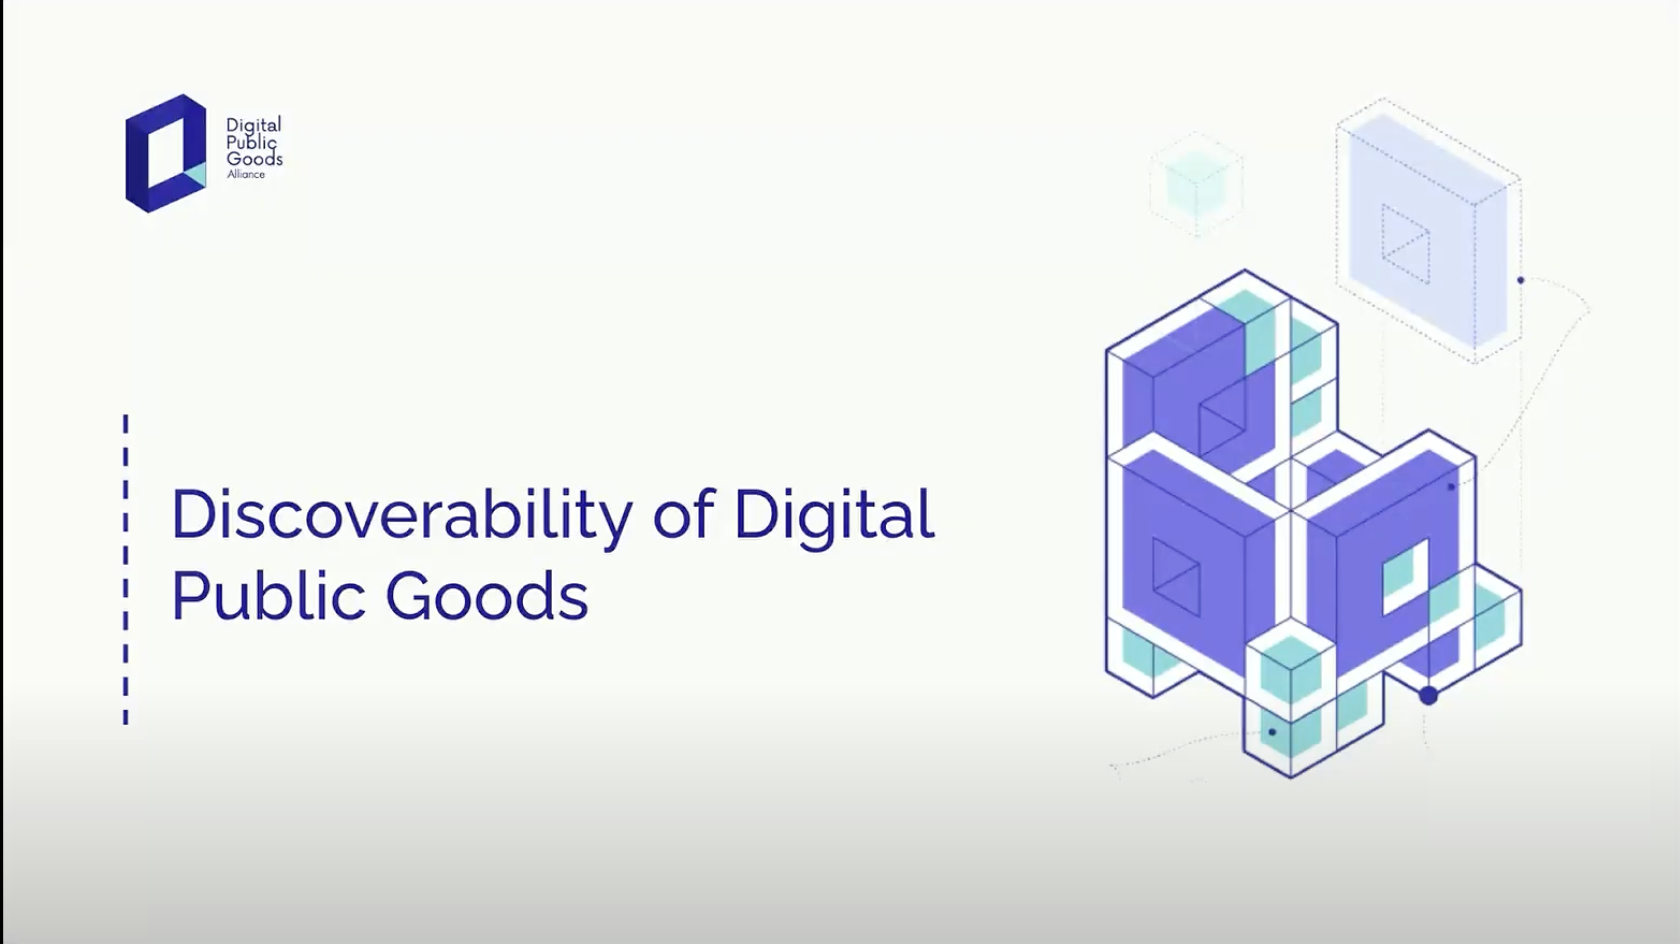 Digital Public Goods and the Challenges with Discoverability